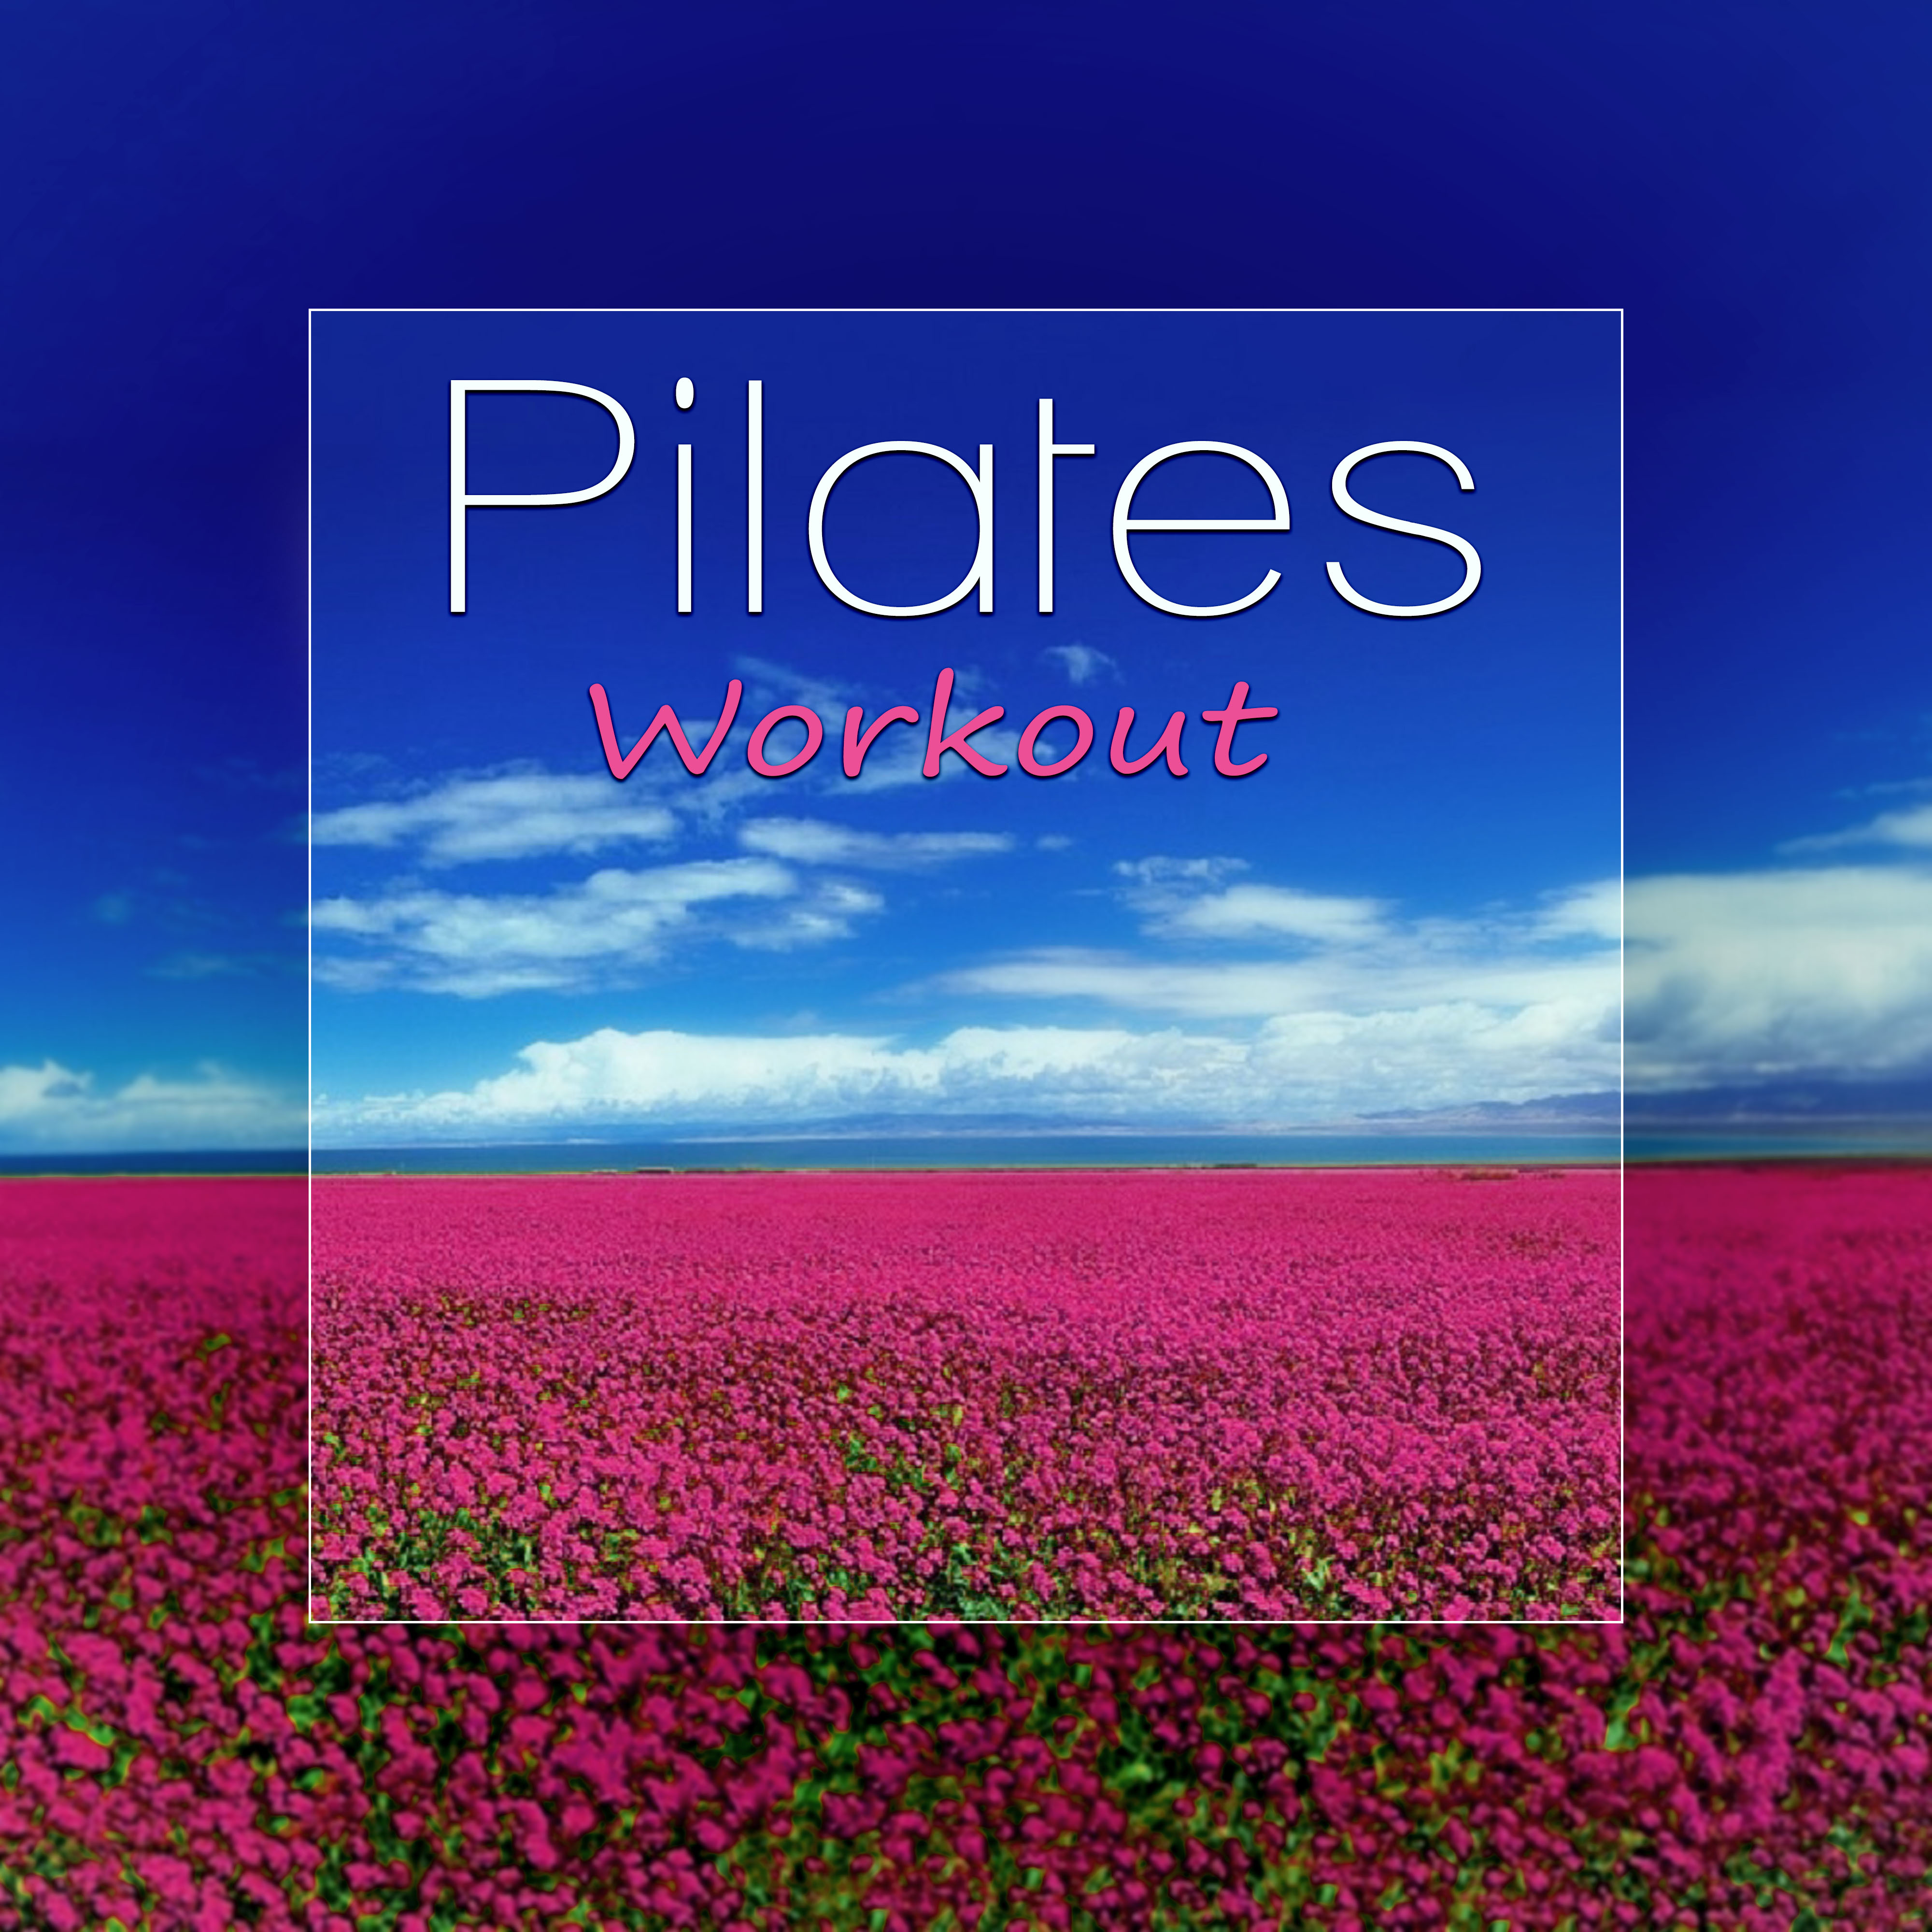 Pilates Workout  Soft Music, Relax, Pilates, Concentration Sounds, Exercise